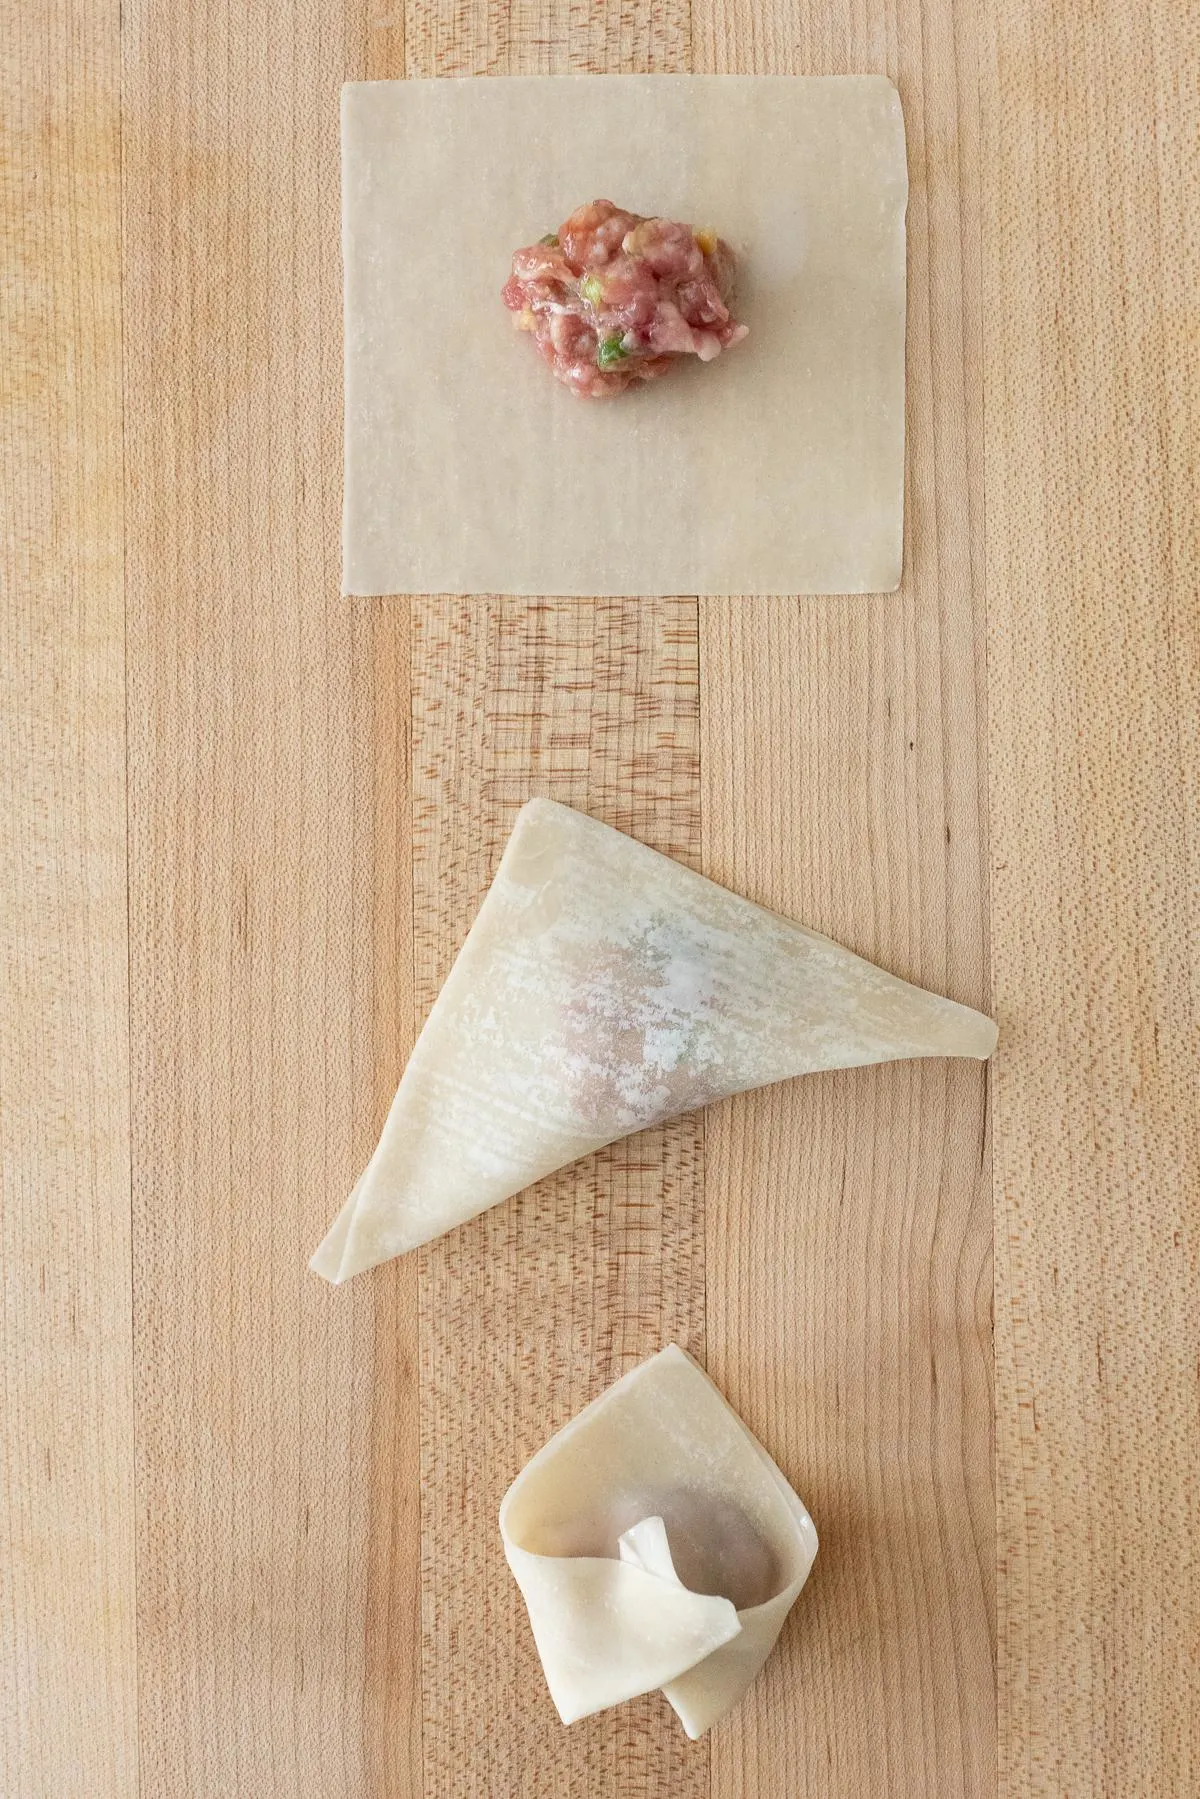 Three steps to folding pork wontons. Place filling in center, fold a triangle, bring the corners together and seal.